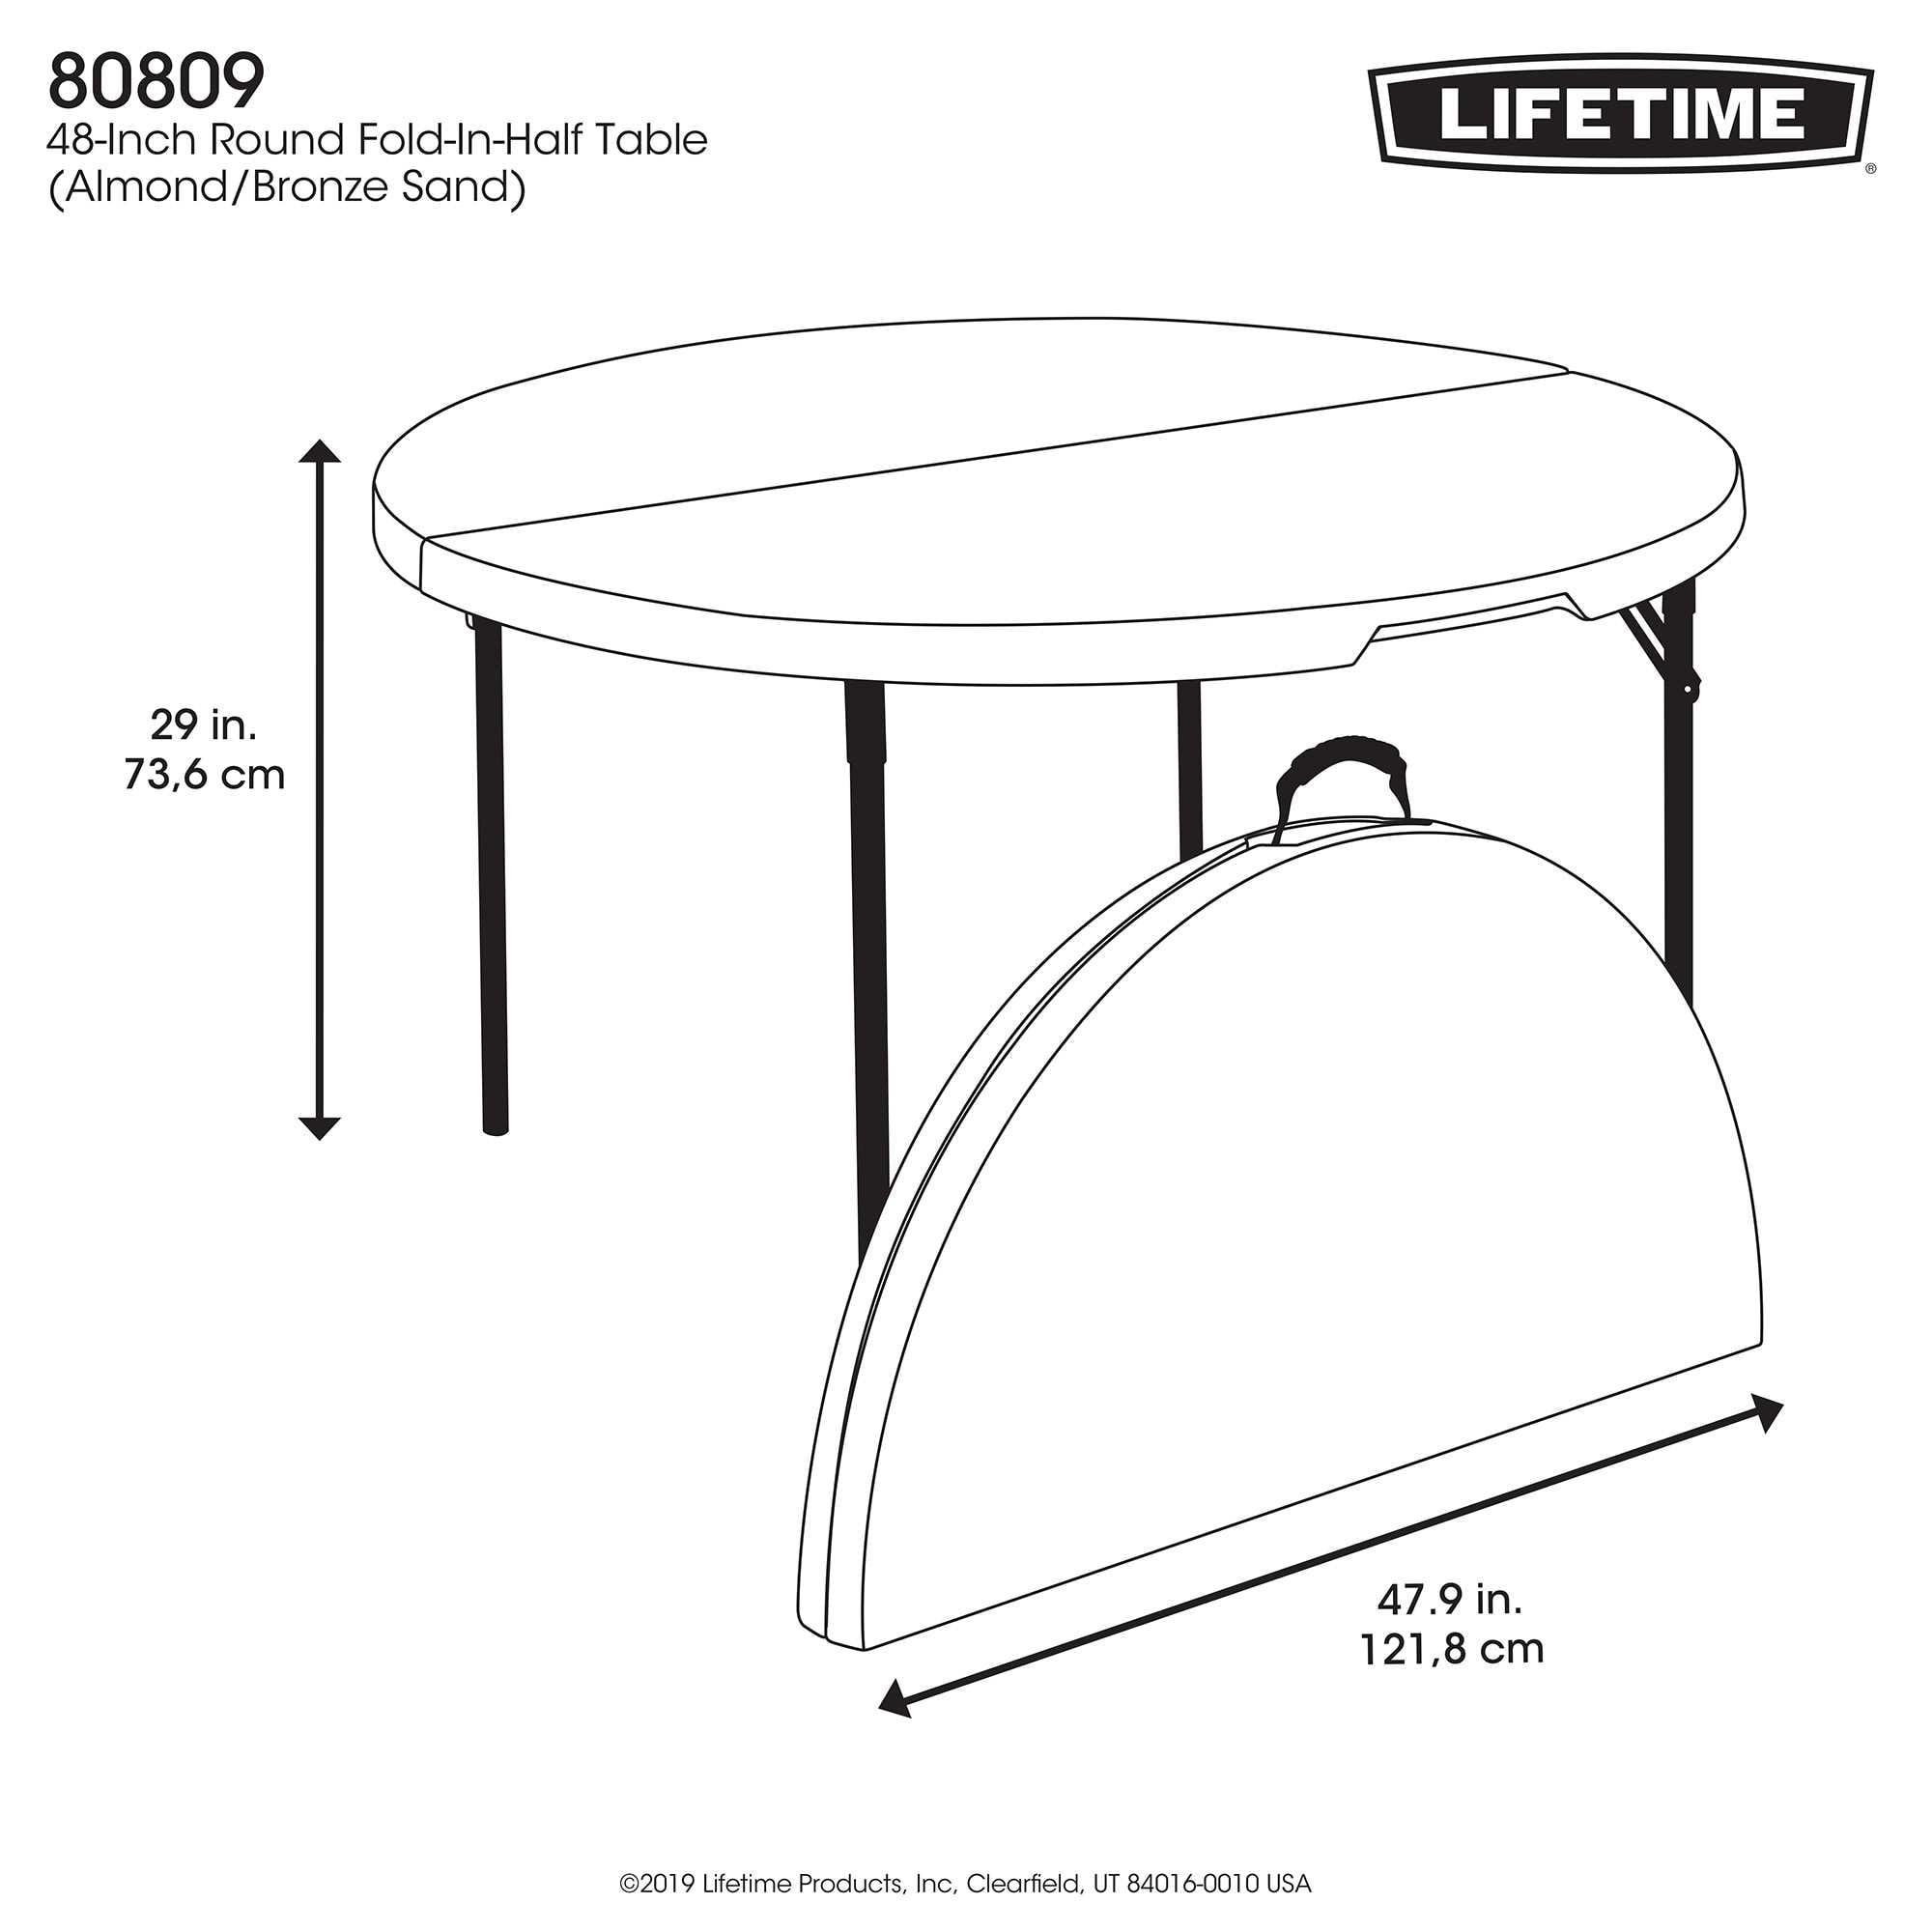 Lifetime 48 Round Fold In Half Table, 48 Inch Round Table Folding